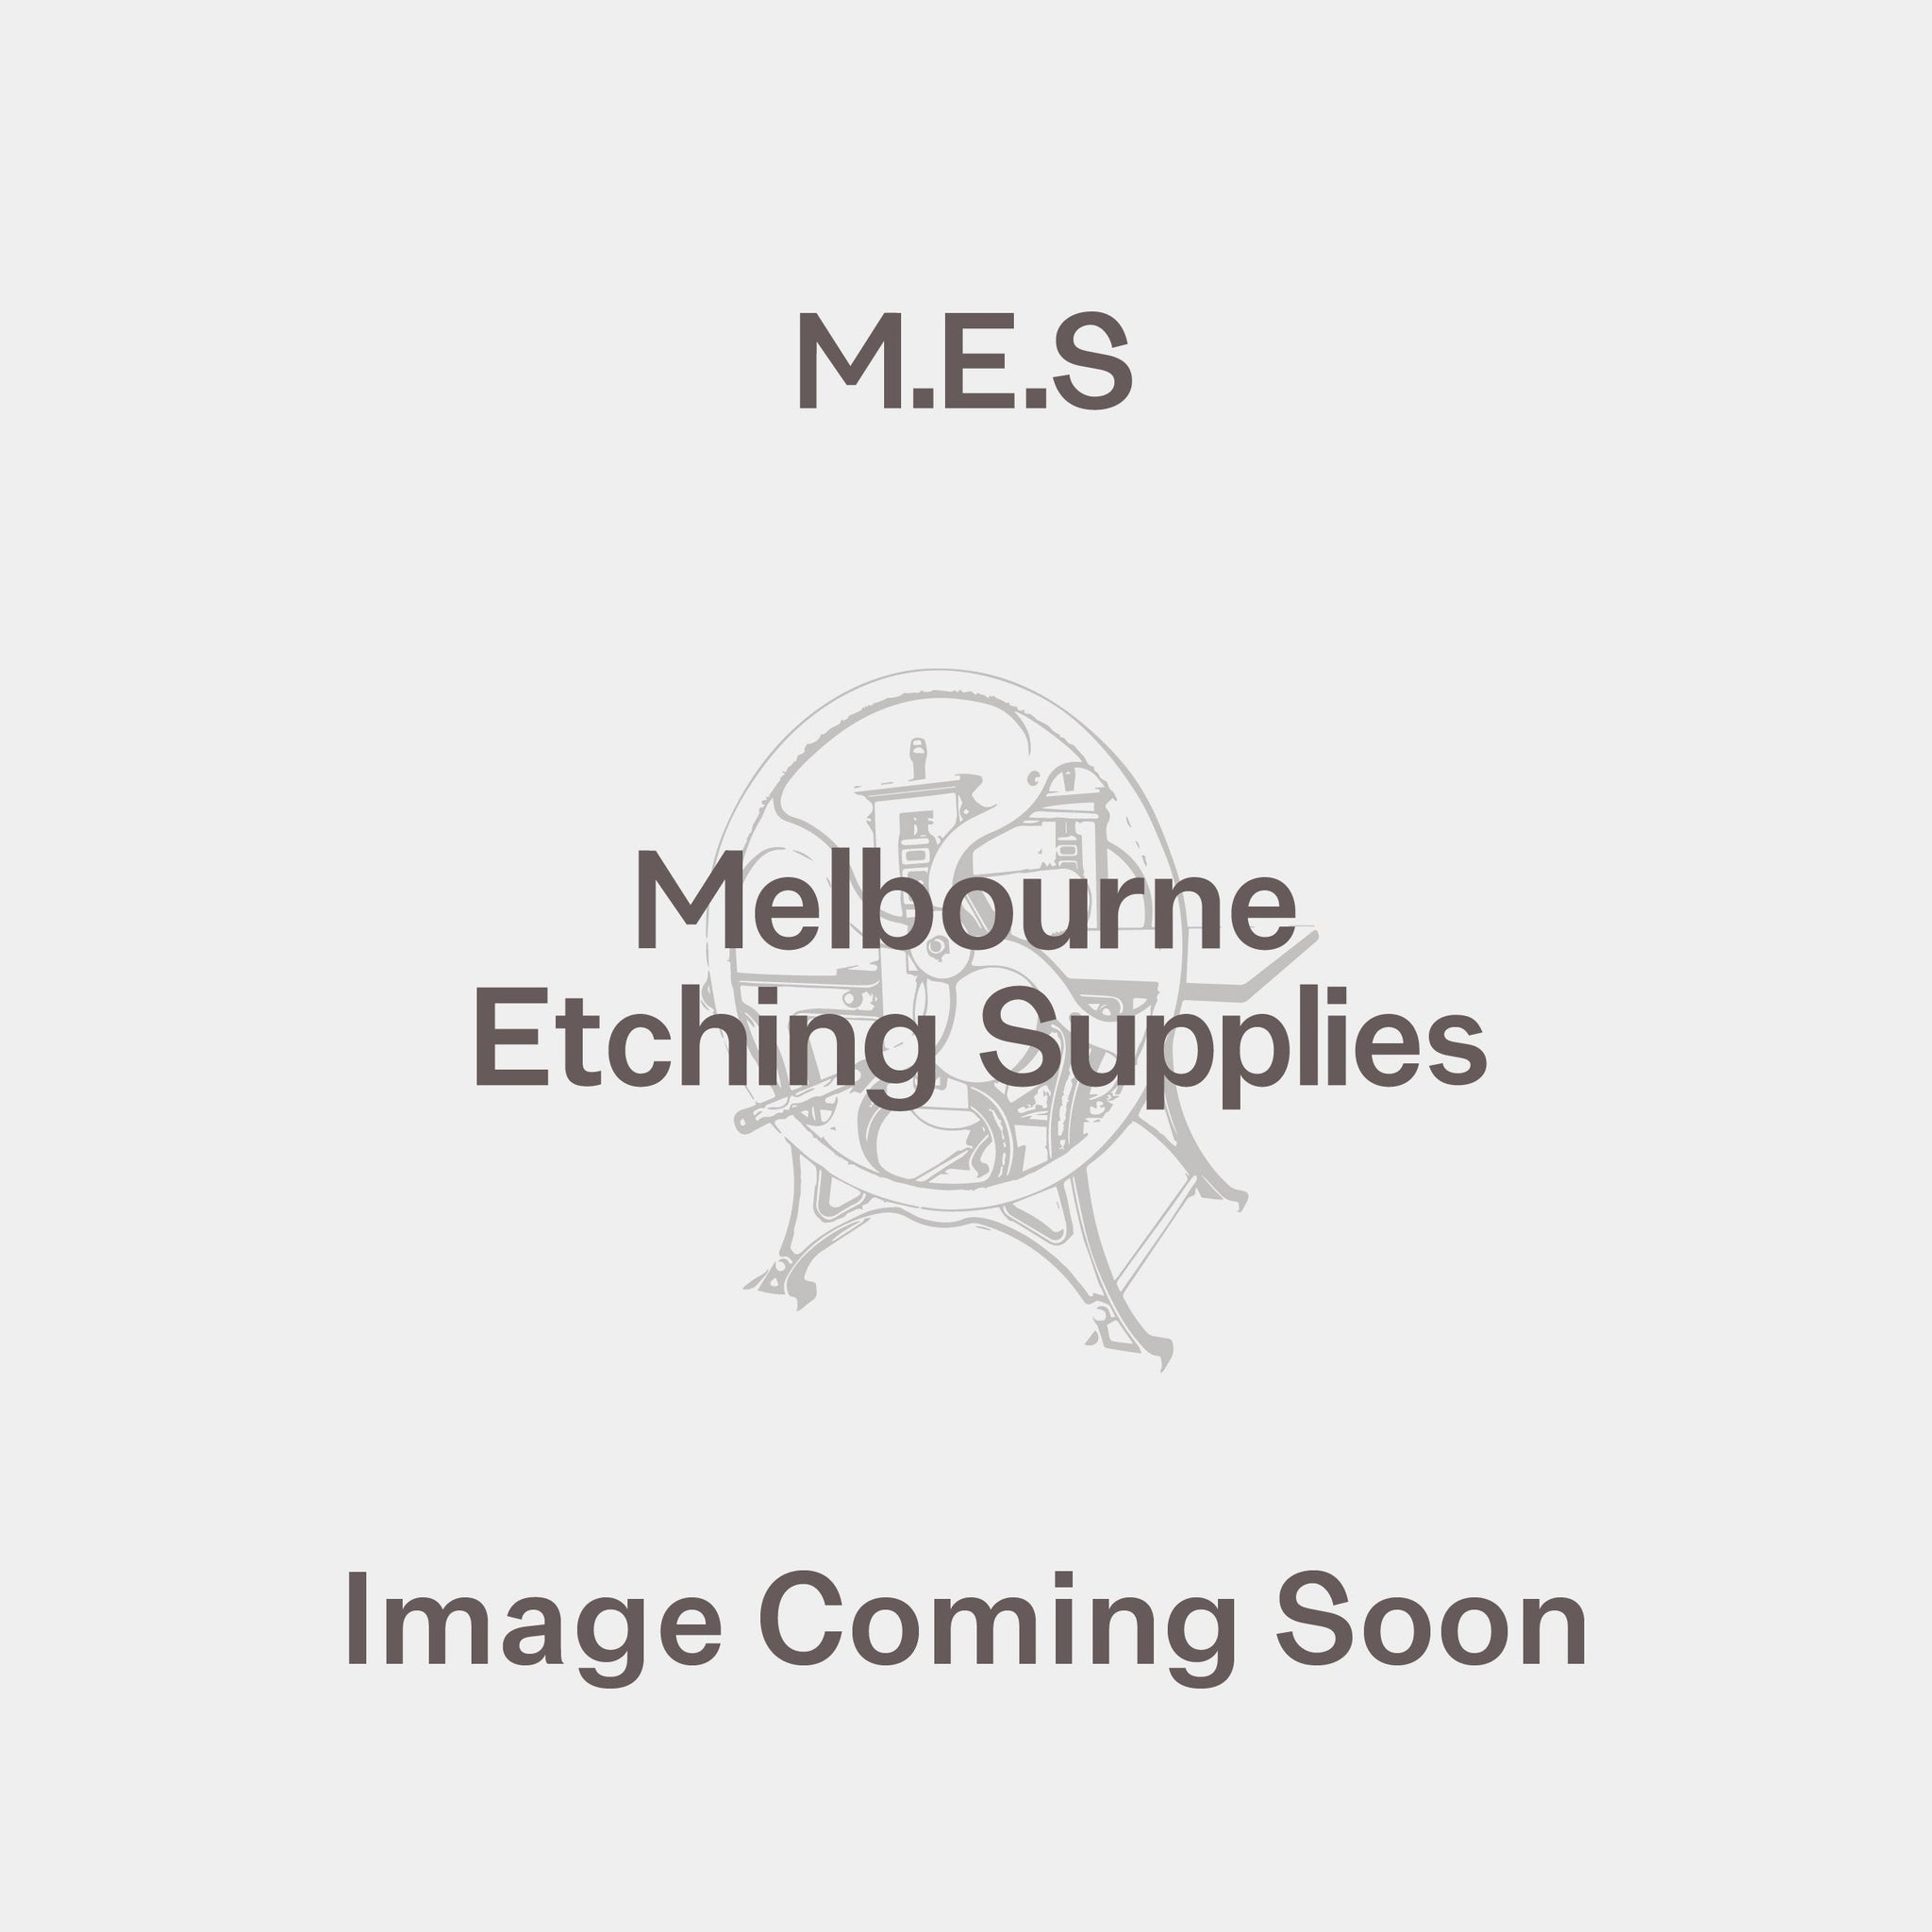 MG Litho 100gsm - Melbourne Etching Supplies